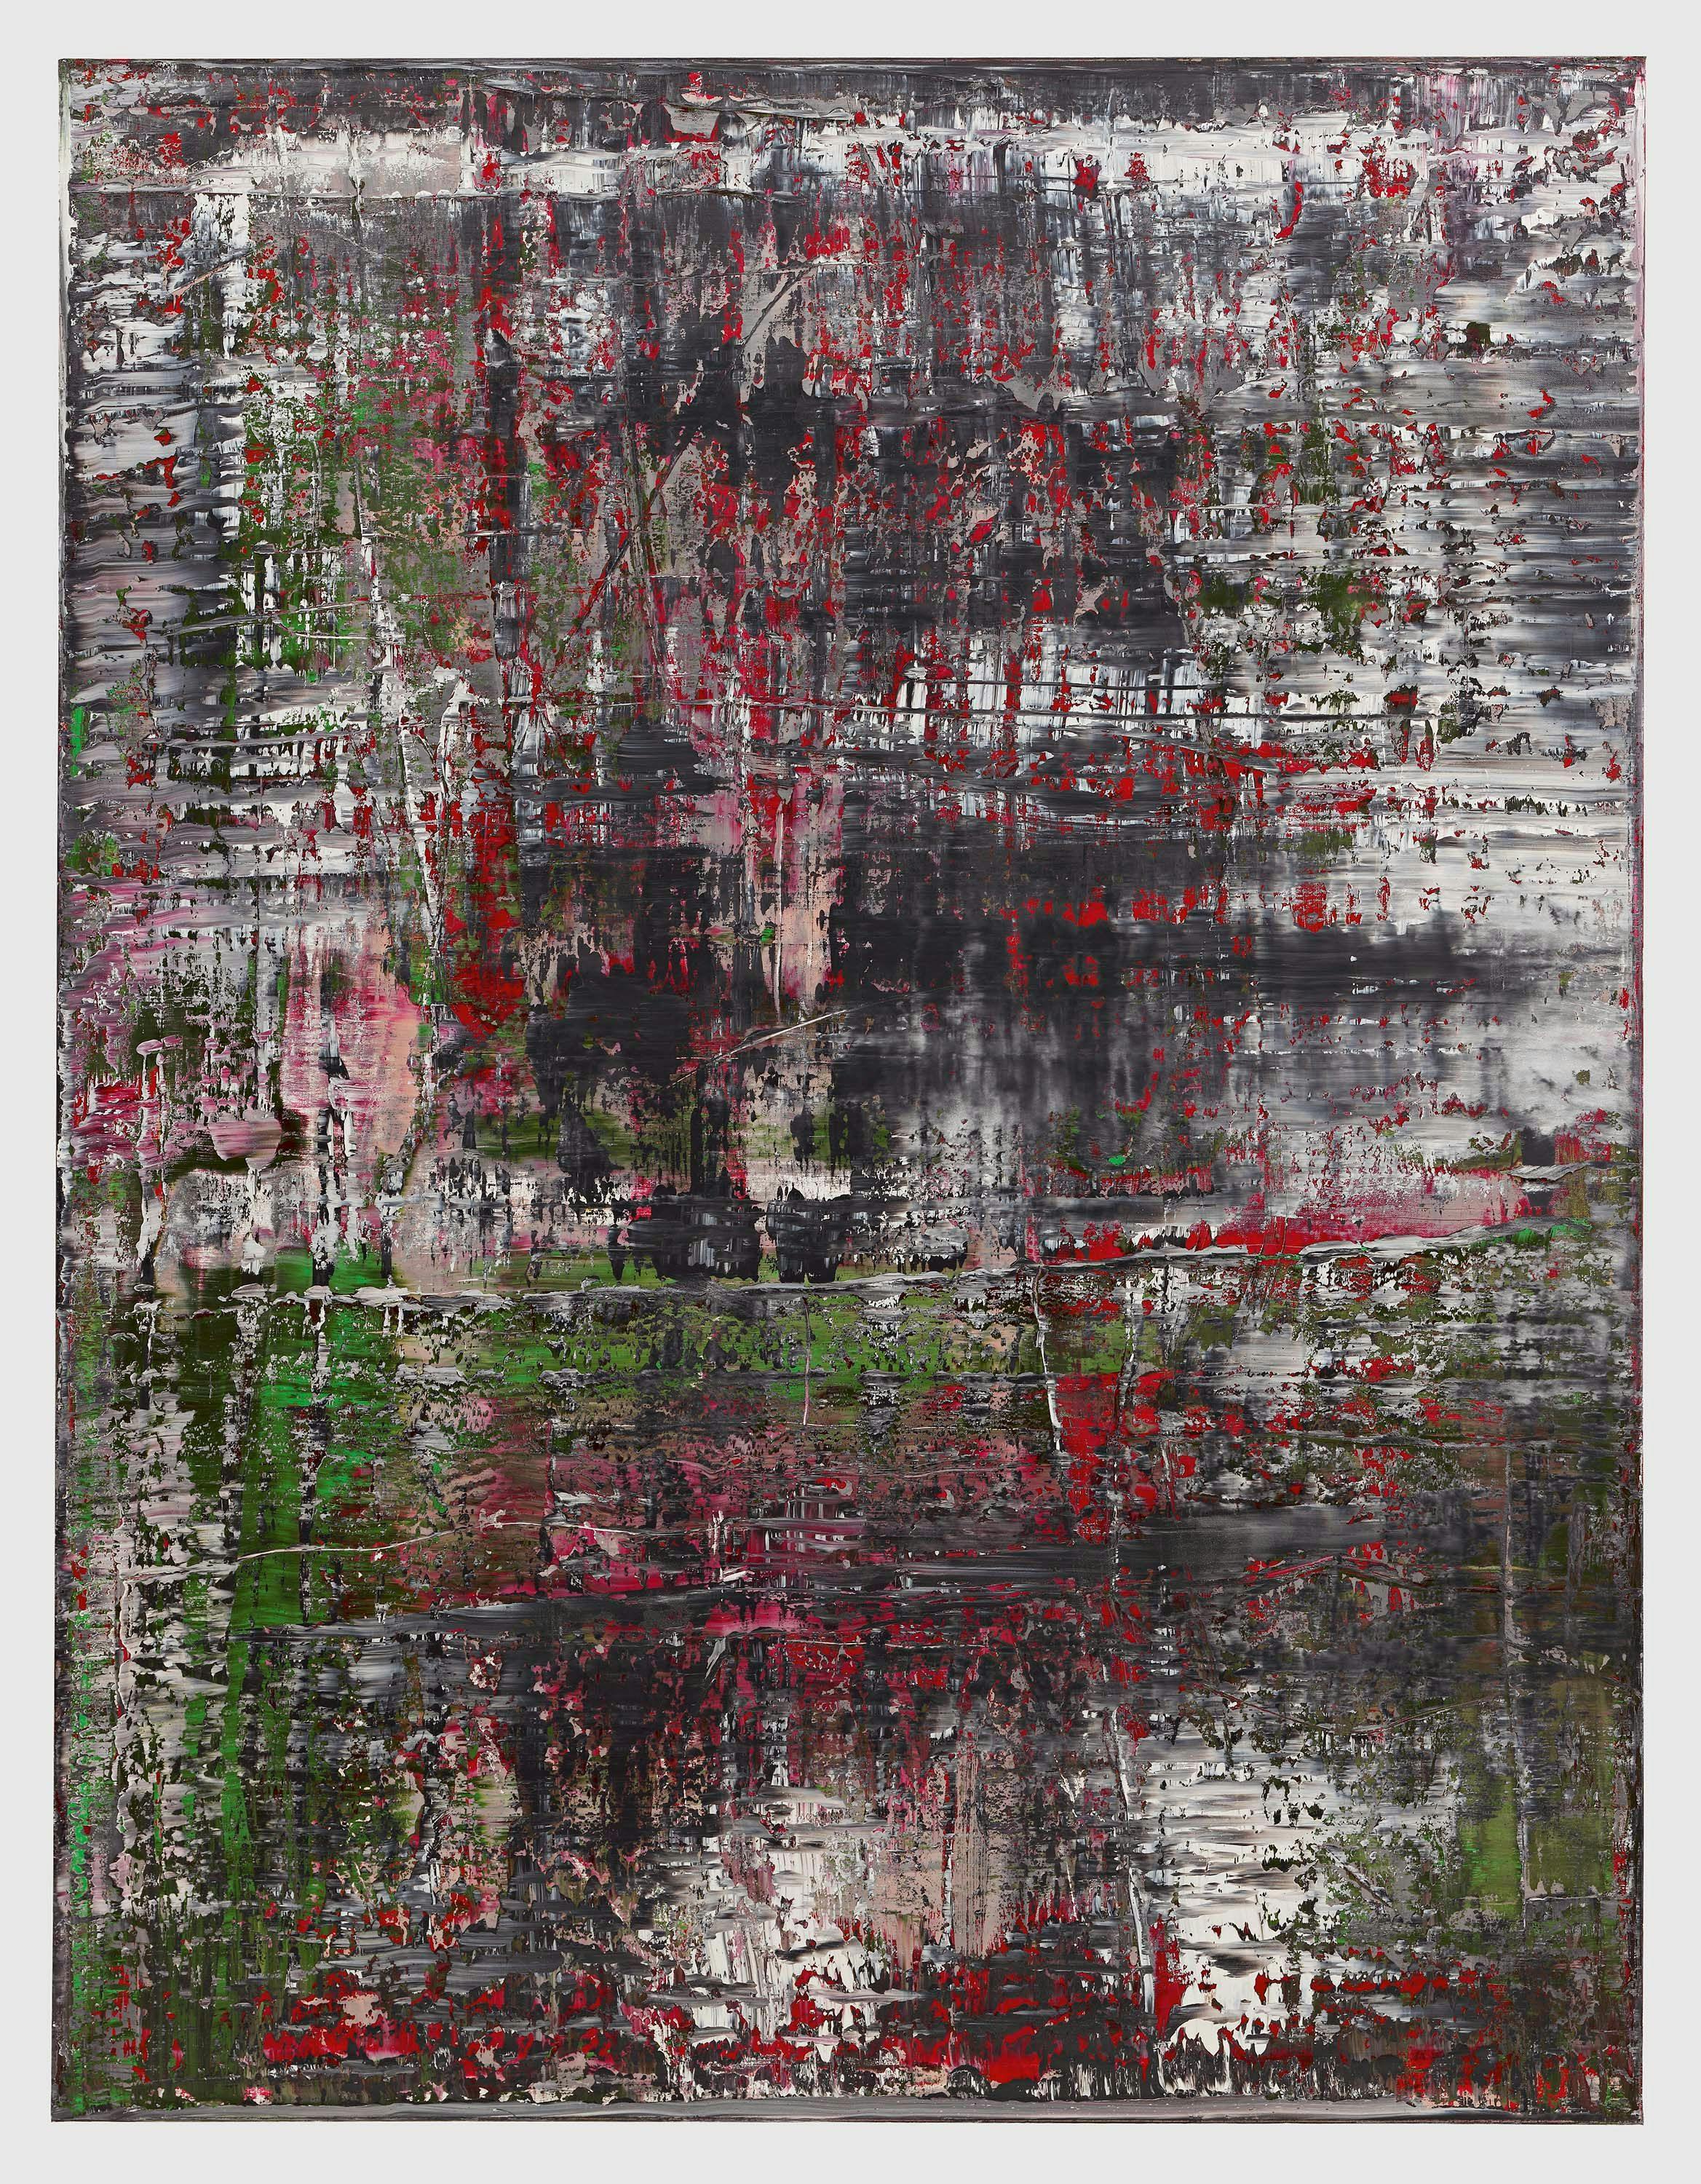 A painting by Gerhard Richter, titled Birkenau, dated 2014.